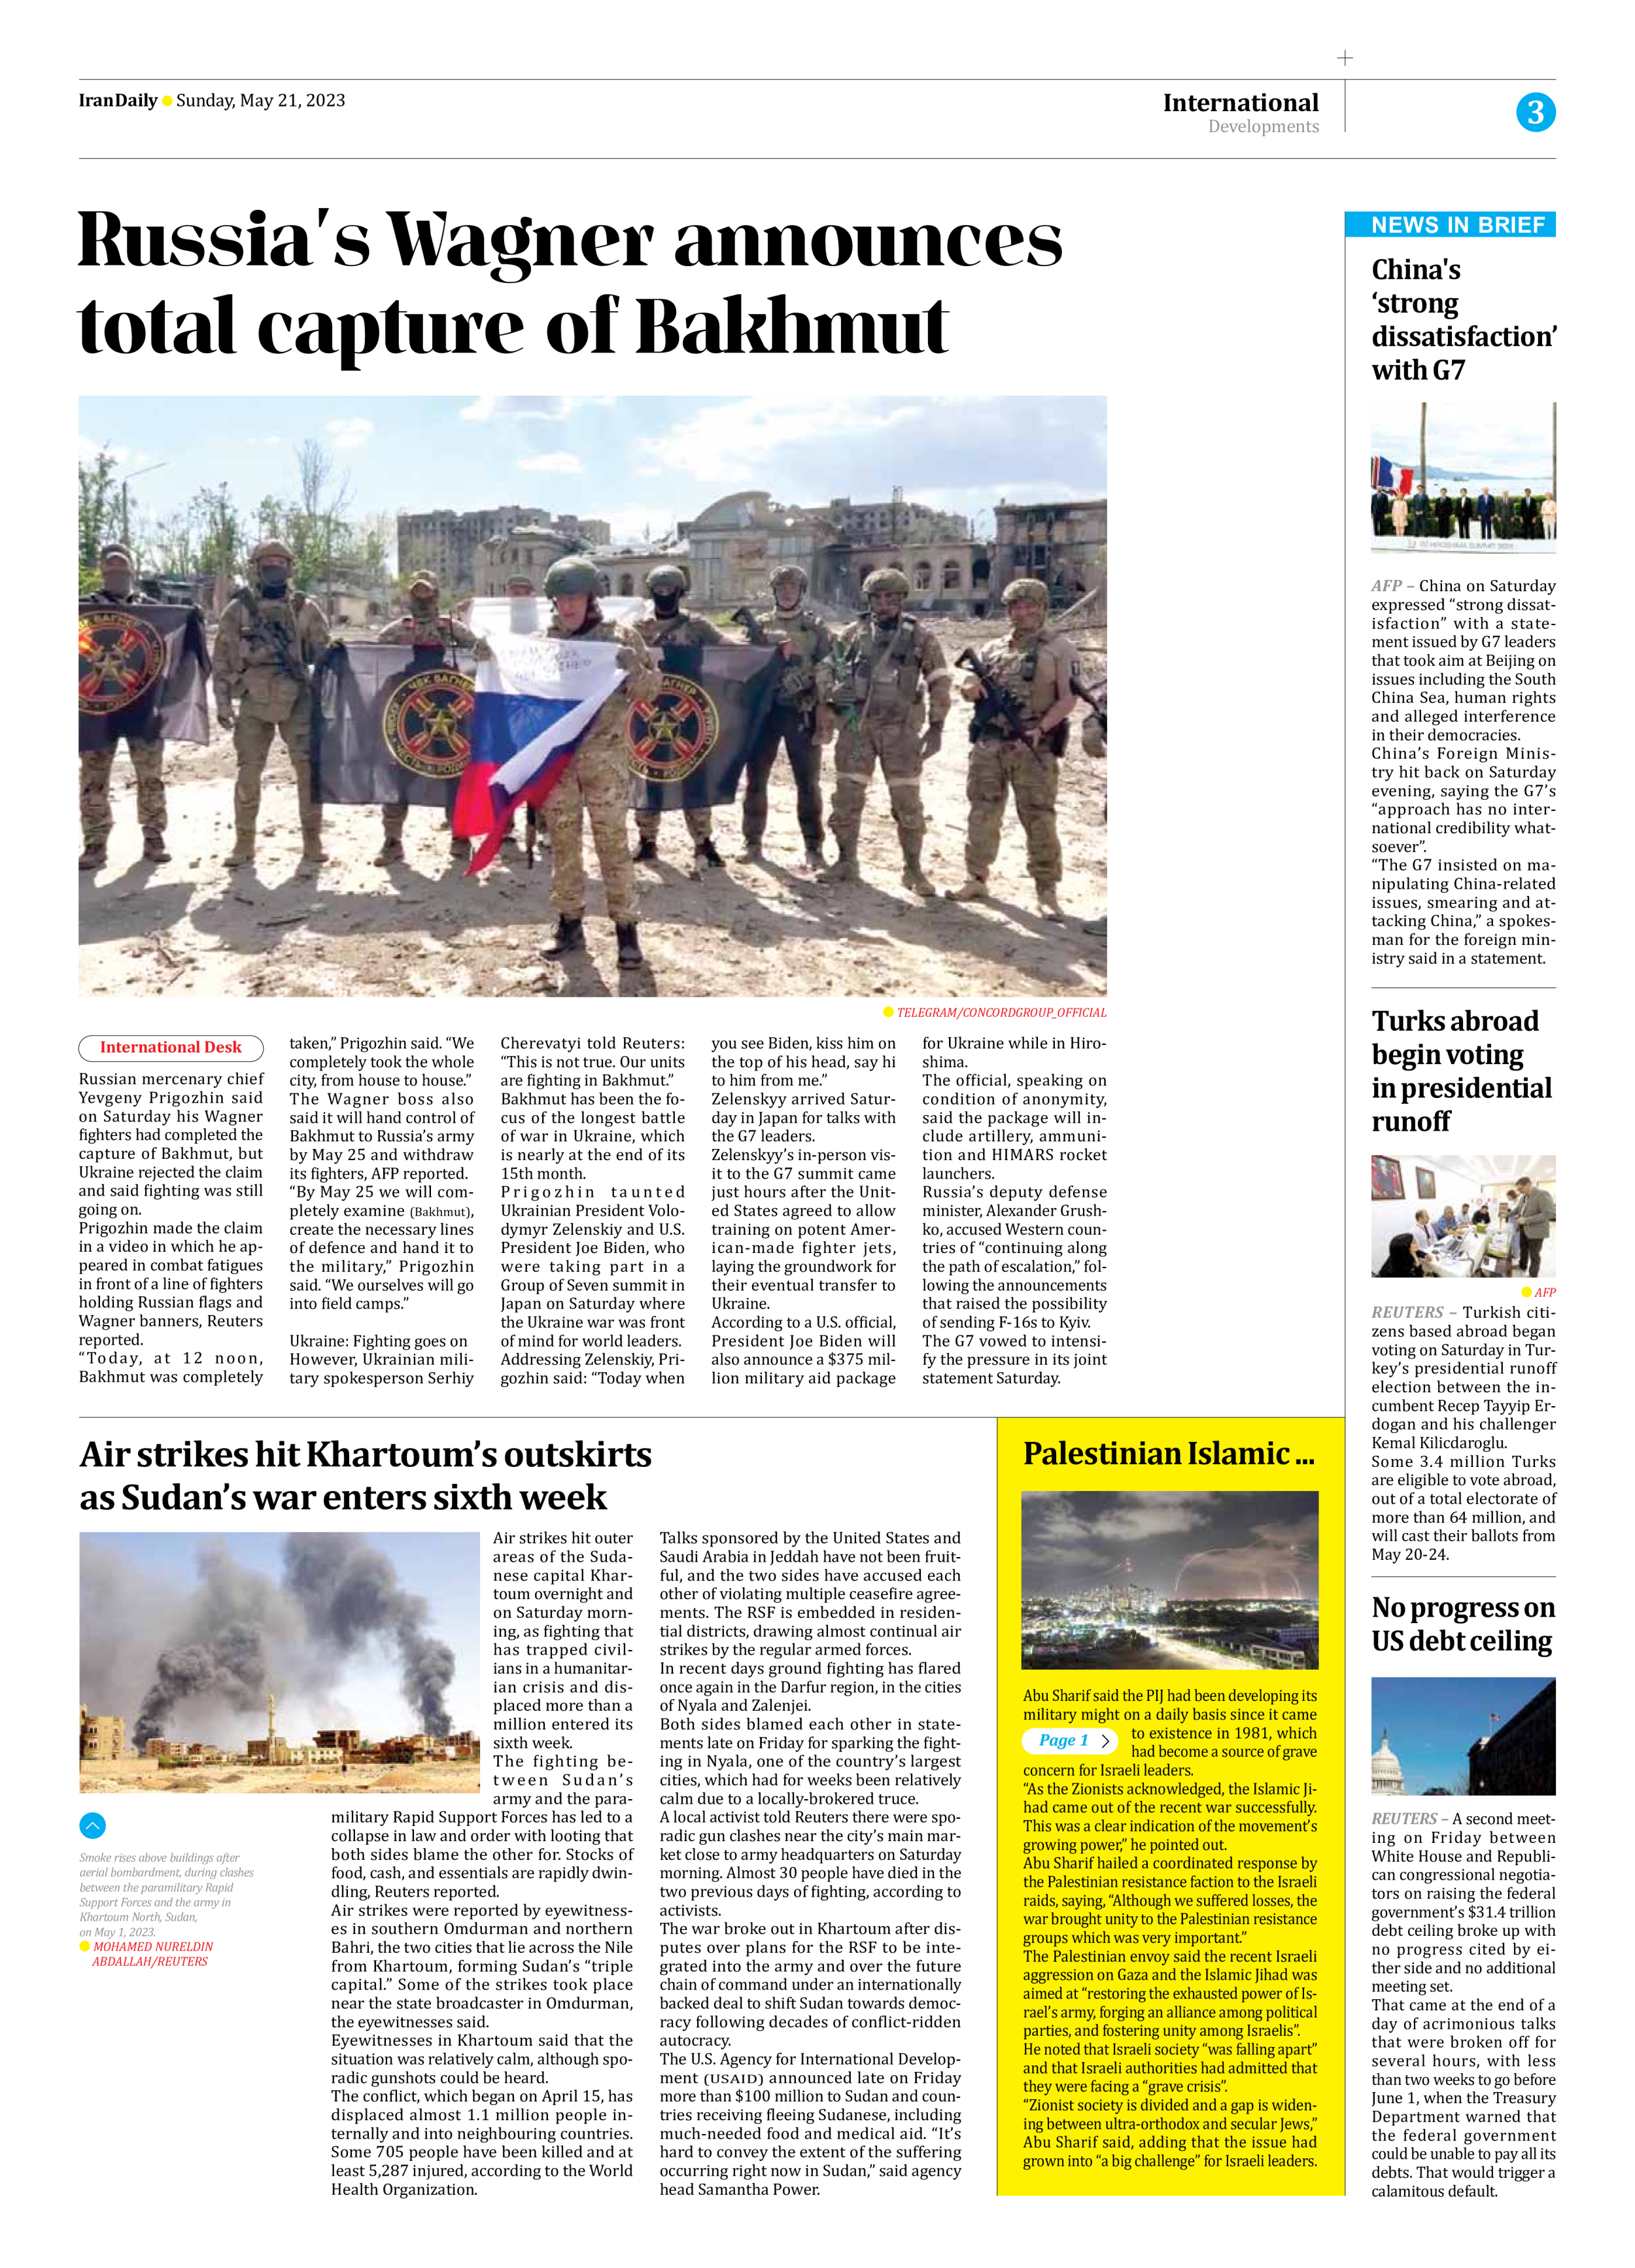 Iran Daily - Number Seven Thousand Two Hundred and Ninety Six - 21 May 2023 - Page 3